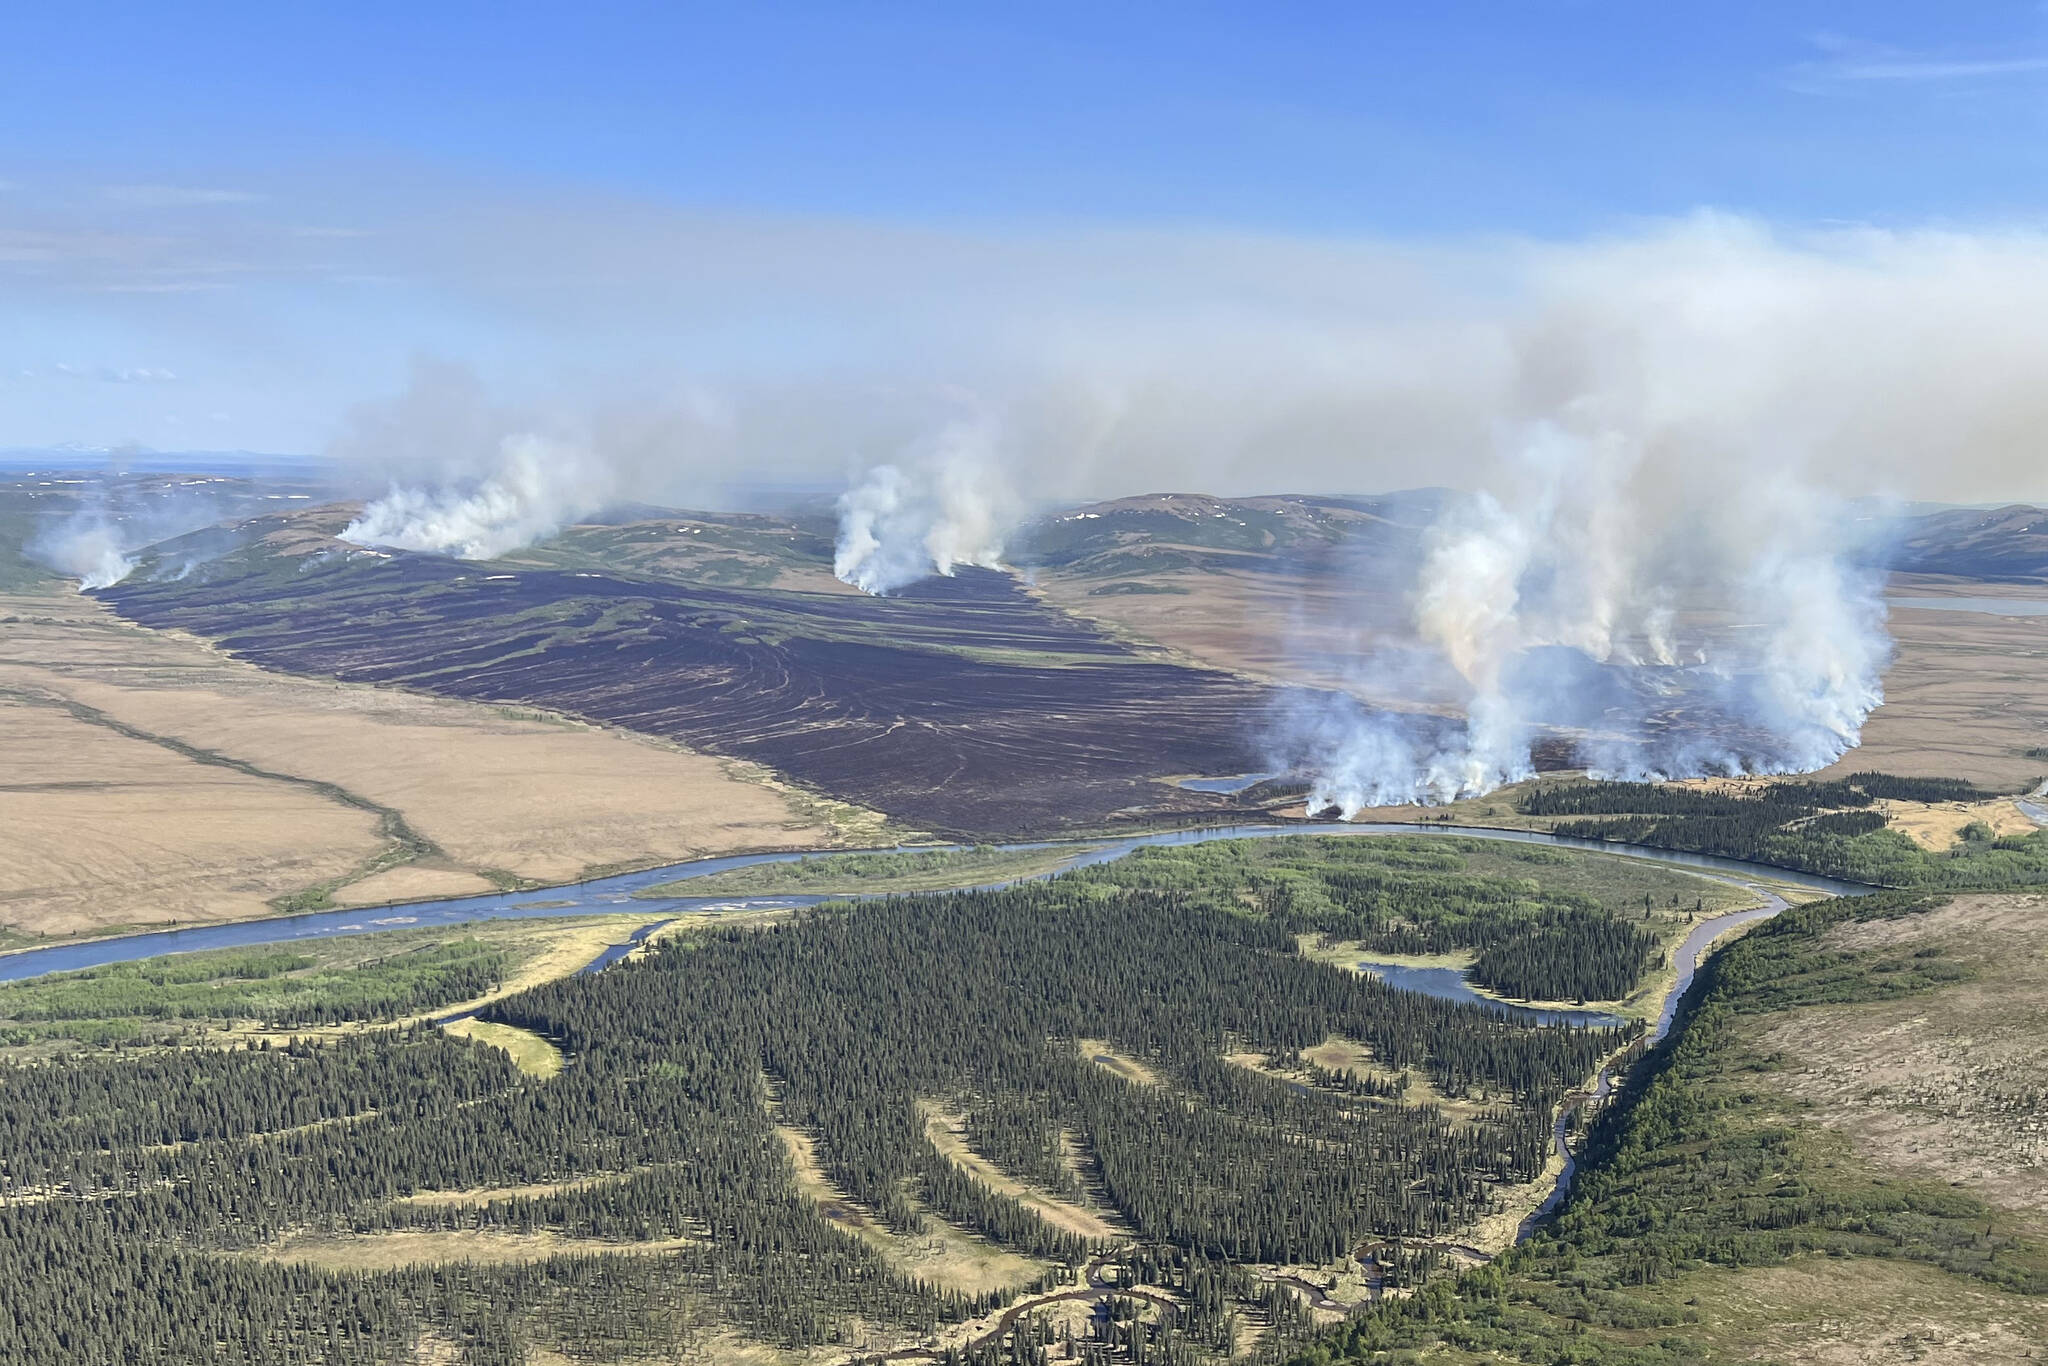 In this aerial photo provided by the BLM Alaska Fire Service, the East Fork Fire burns about 25 miles north of St. Mary’s, Alaska on June 2, 2022. The largest documented wildfire ever burning through tundra in southwest Alaska is within miles of two Alaska Native villages, prompting dozens of residents with respiratory problems to voluntarily evacuate. (Pat Johnson, BLM Alaska Fire Service via AP)